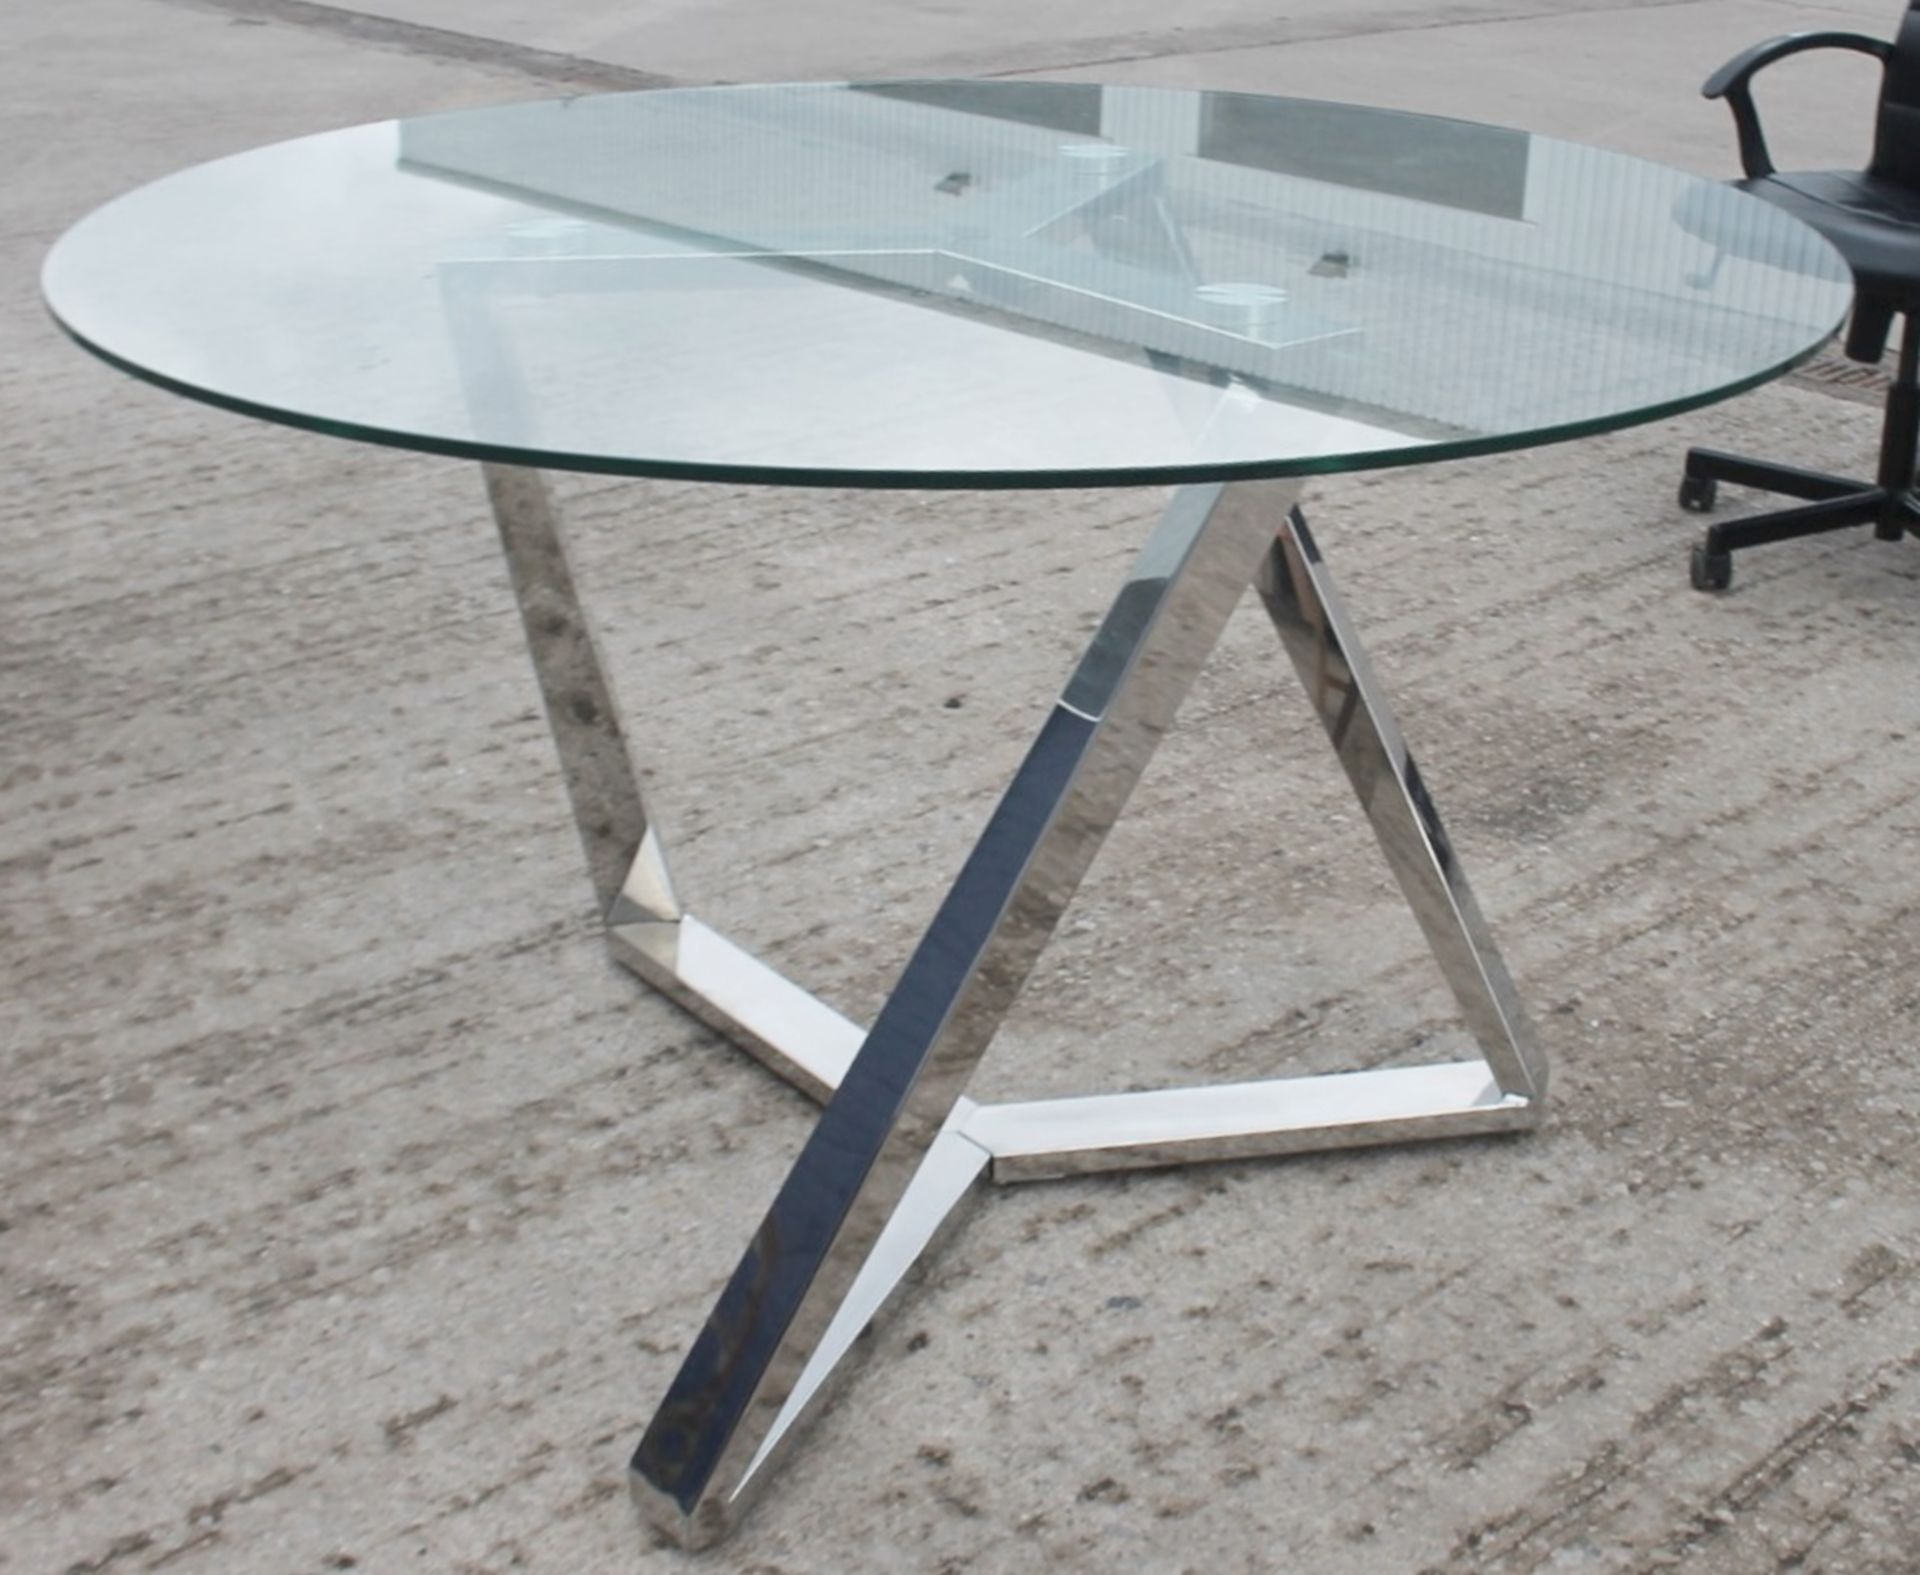 1 x Glass Topped Round Dining Tables With Angled Chrome Base - Dimensions: Ø120 x H75cm - Image 2 of 4